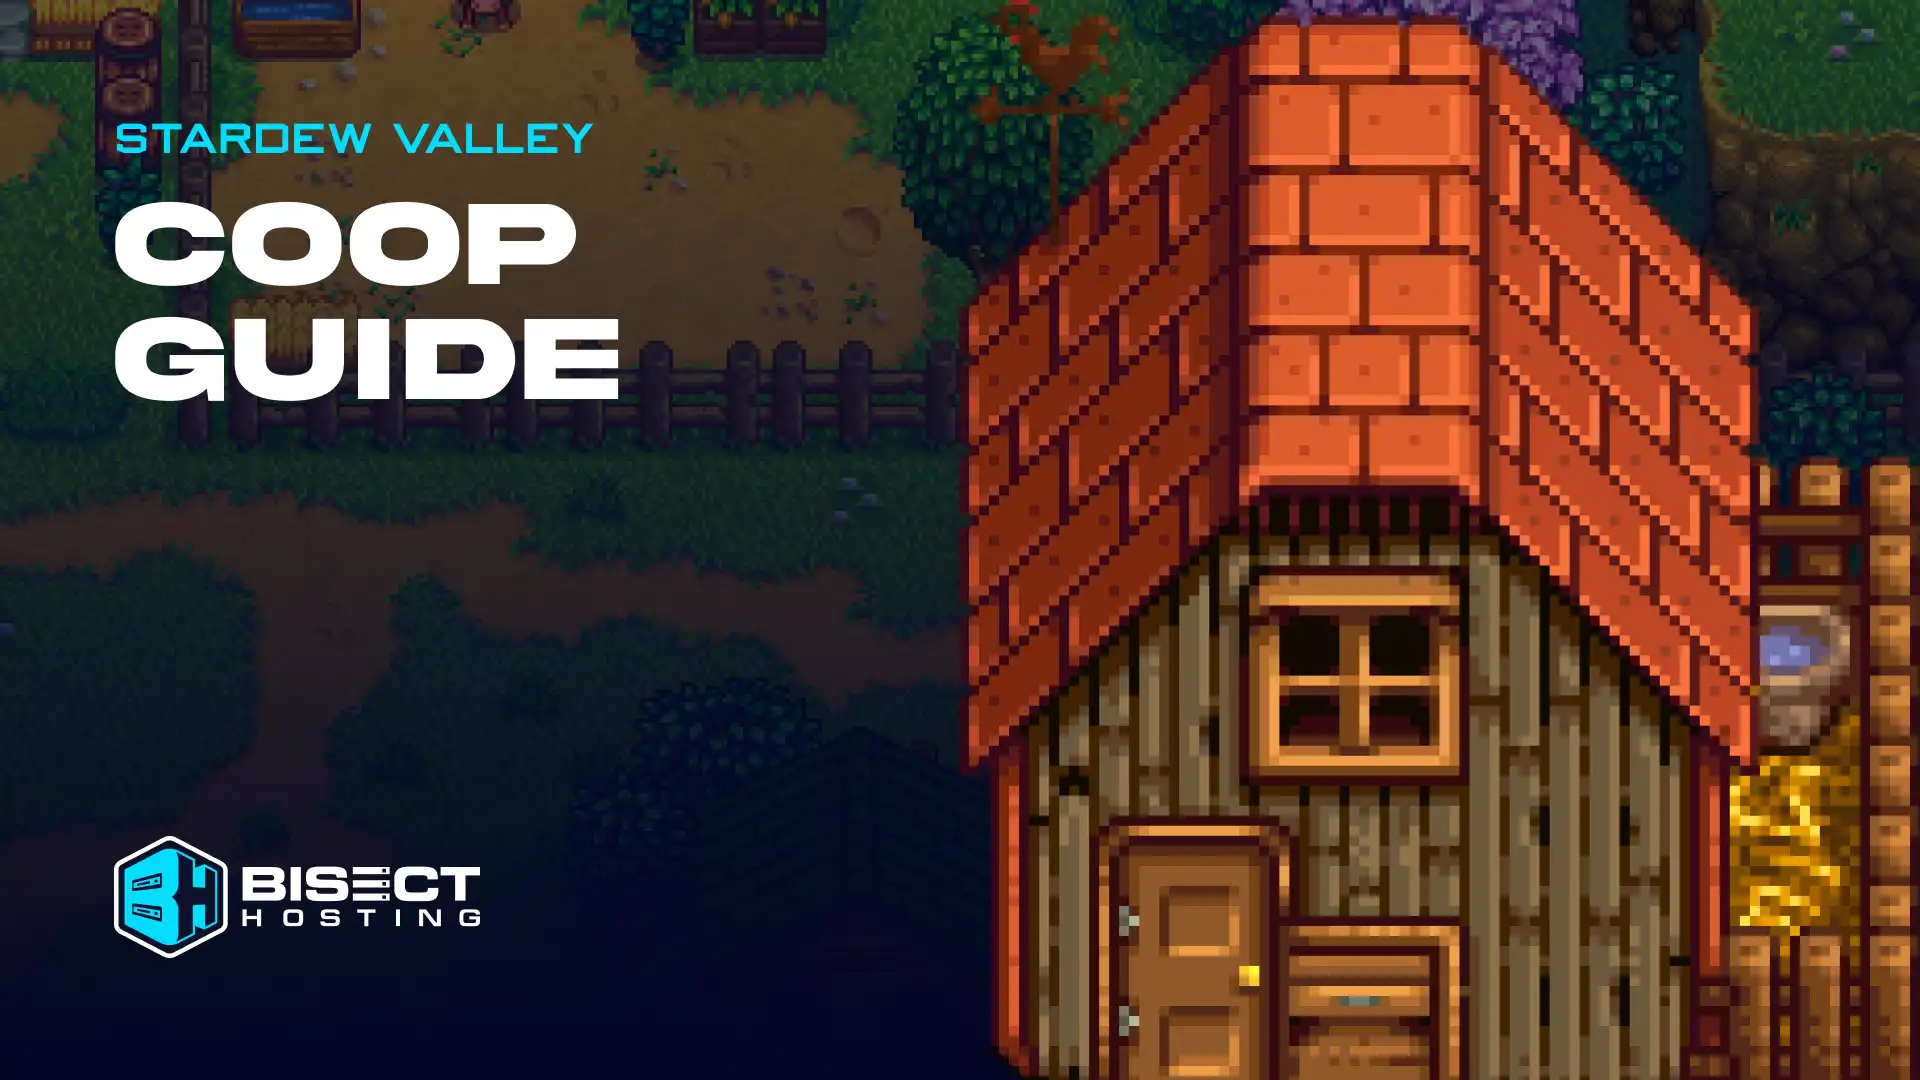 Stardew Valley Coop Guide: How to Build, All Upgrades, Requirements, Materials, & more